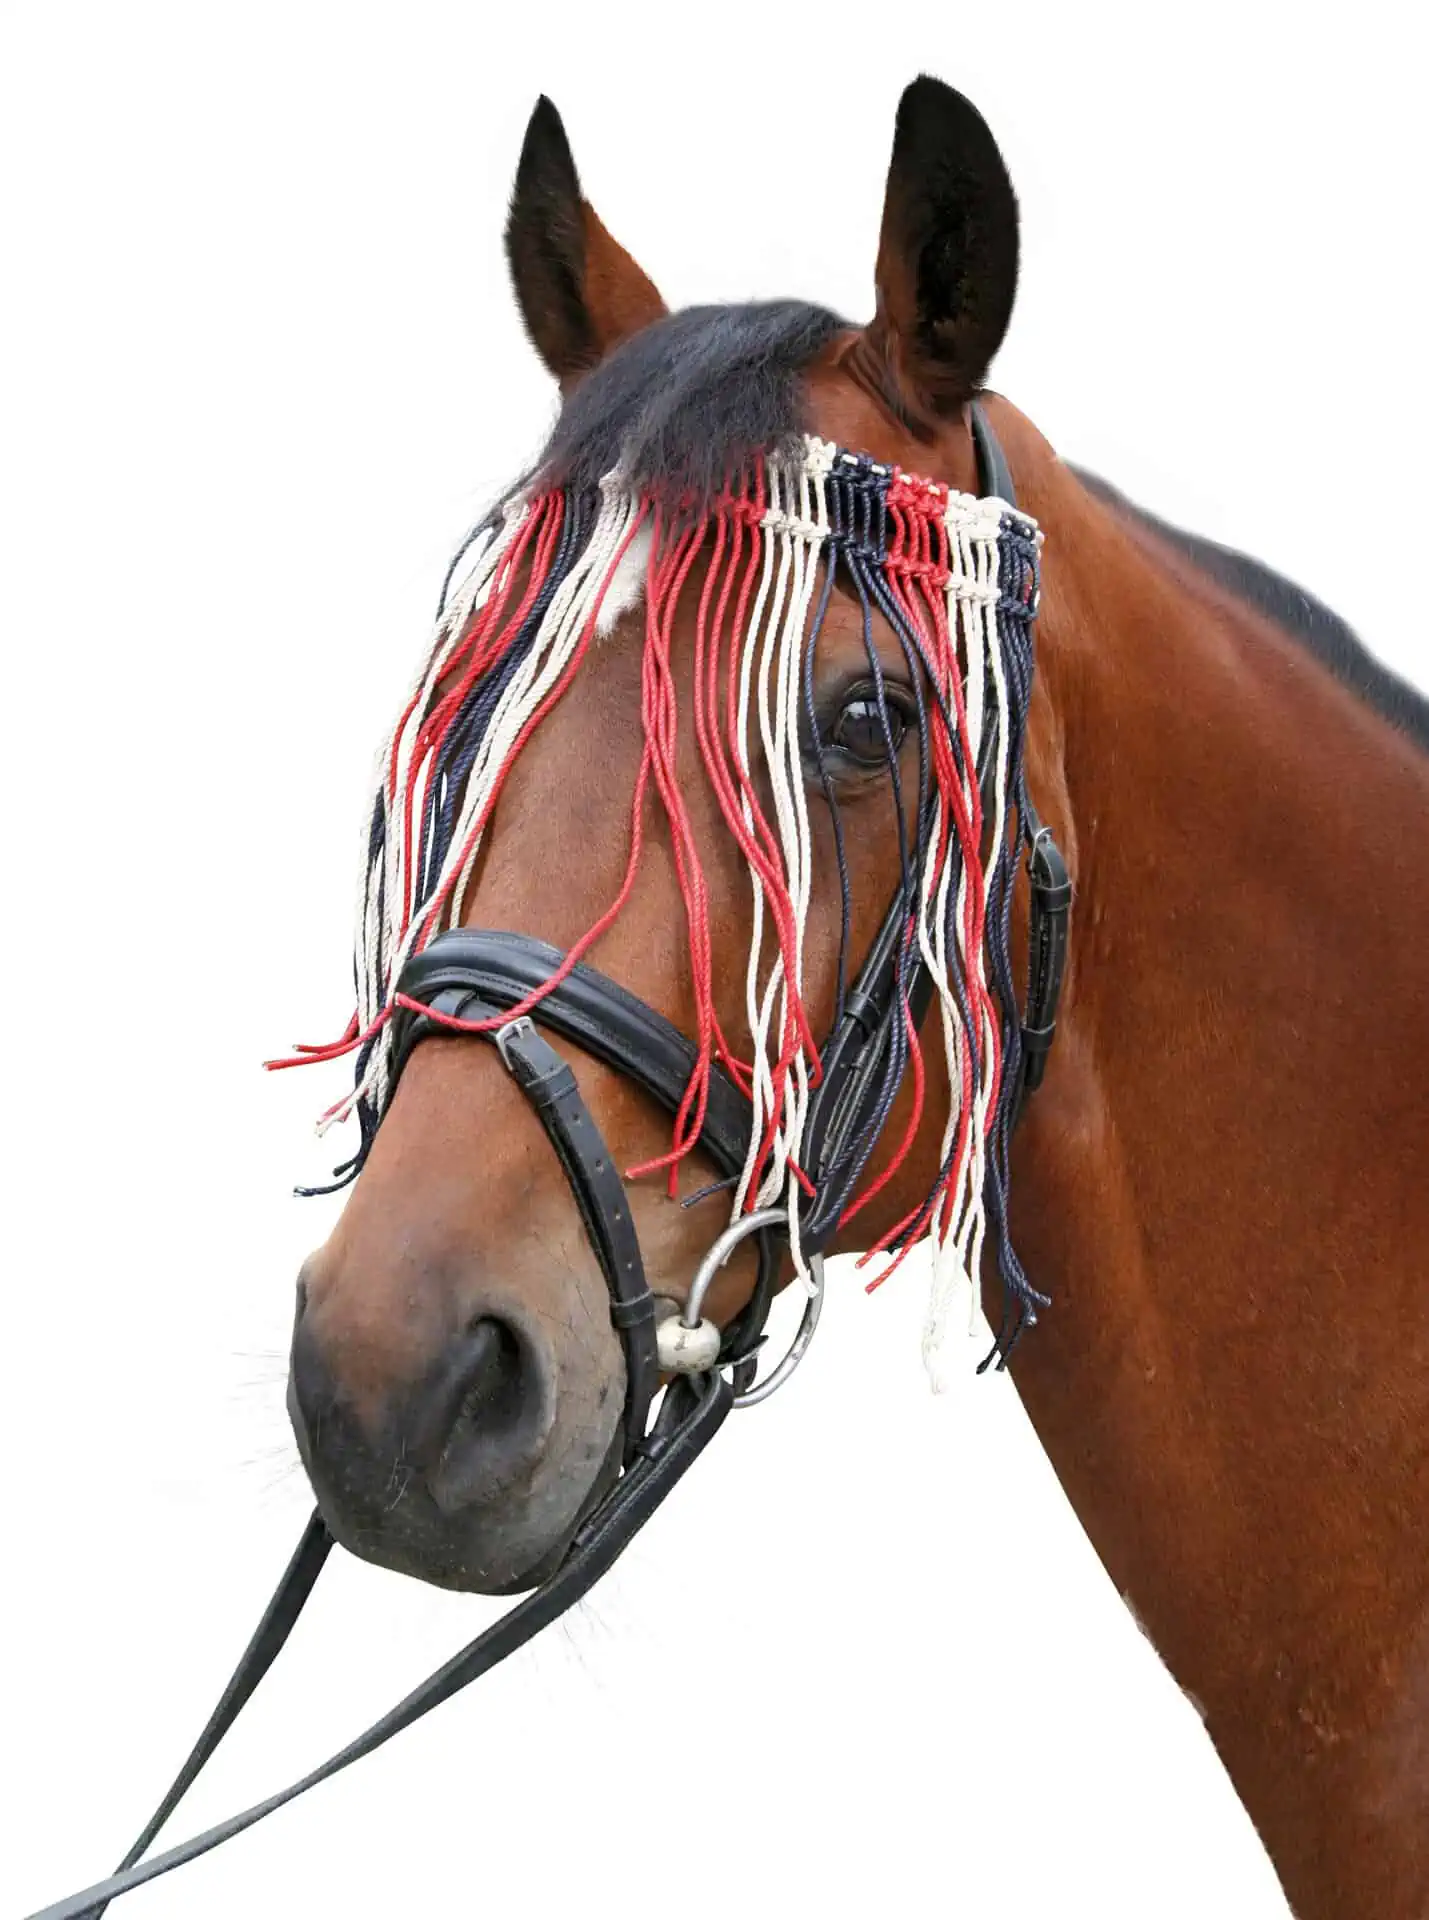 Fly fringe strap cob, made of cotton cords